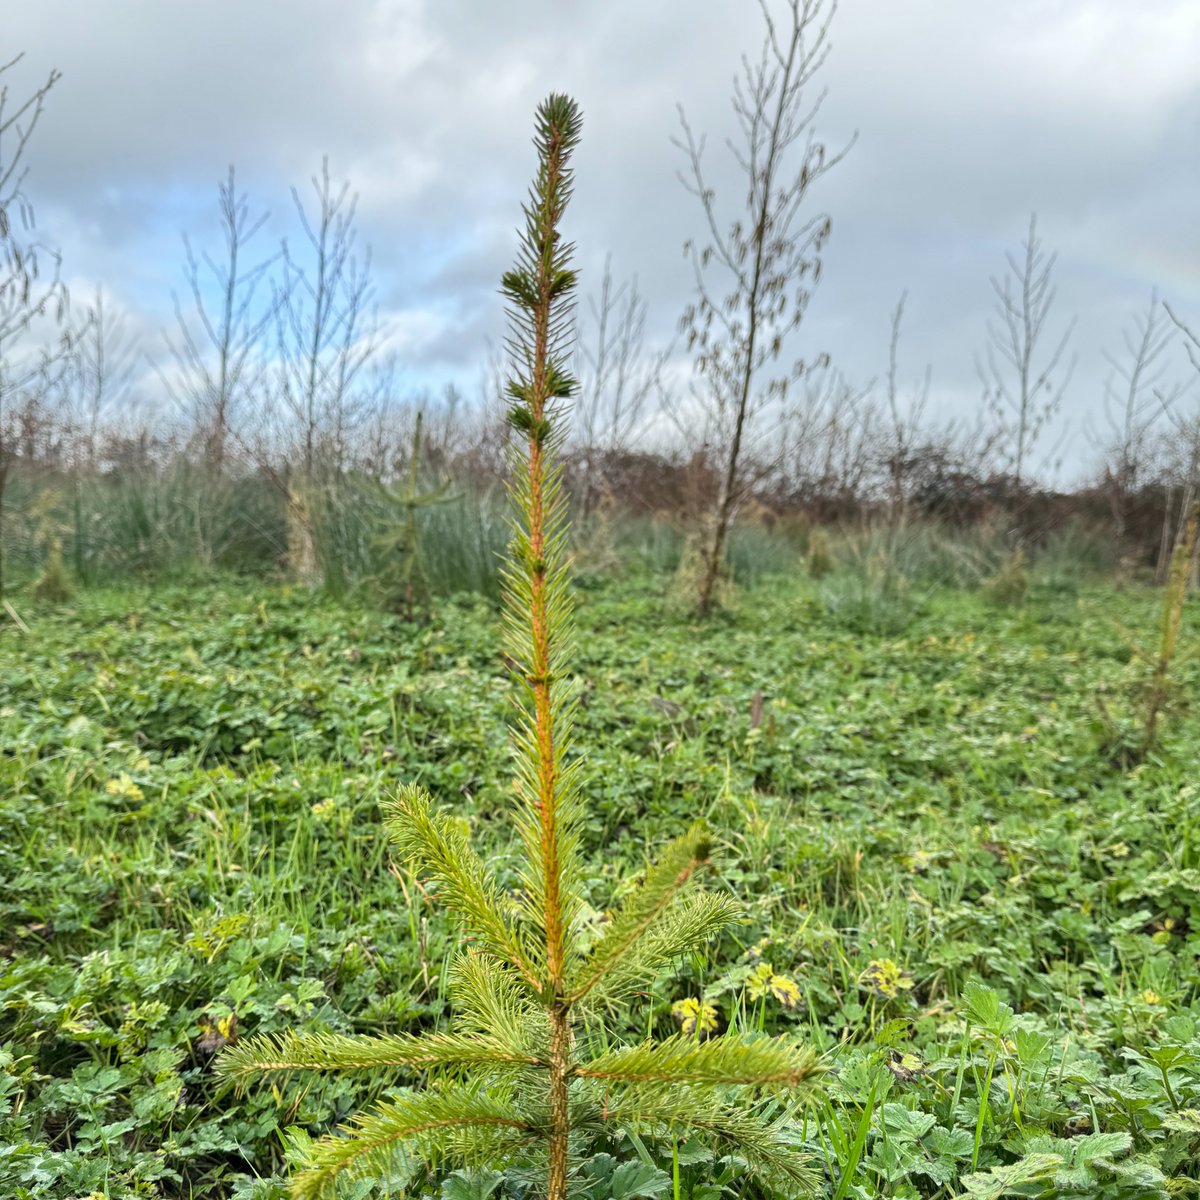 Last week, our Co. Limerick woodland amazed us! Adler trees grew from 7/8 to nearly 12 feet since January🌱🌳 Warmer weather sparked tree blooms, boosting shelter and food for biodiversity🌲 Join us in making a difference: info@woodlandcoffee.ie ☕️🌲